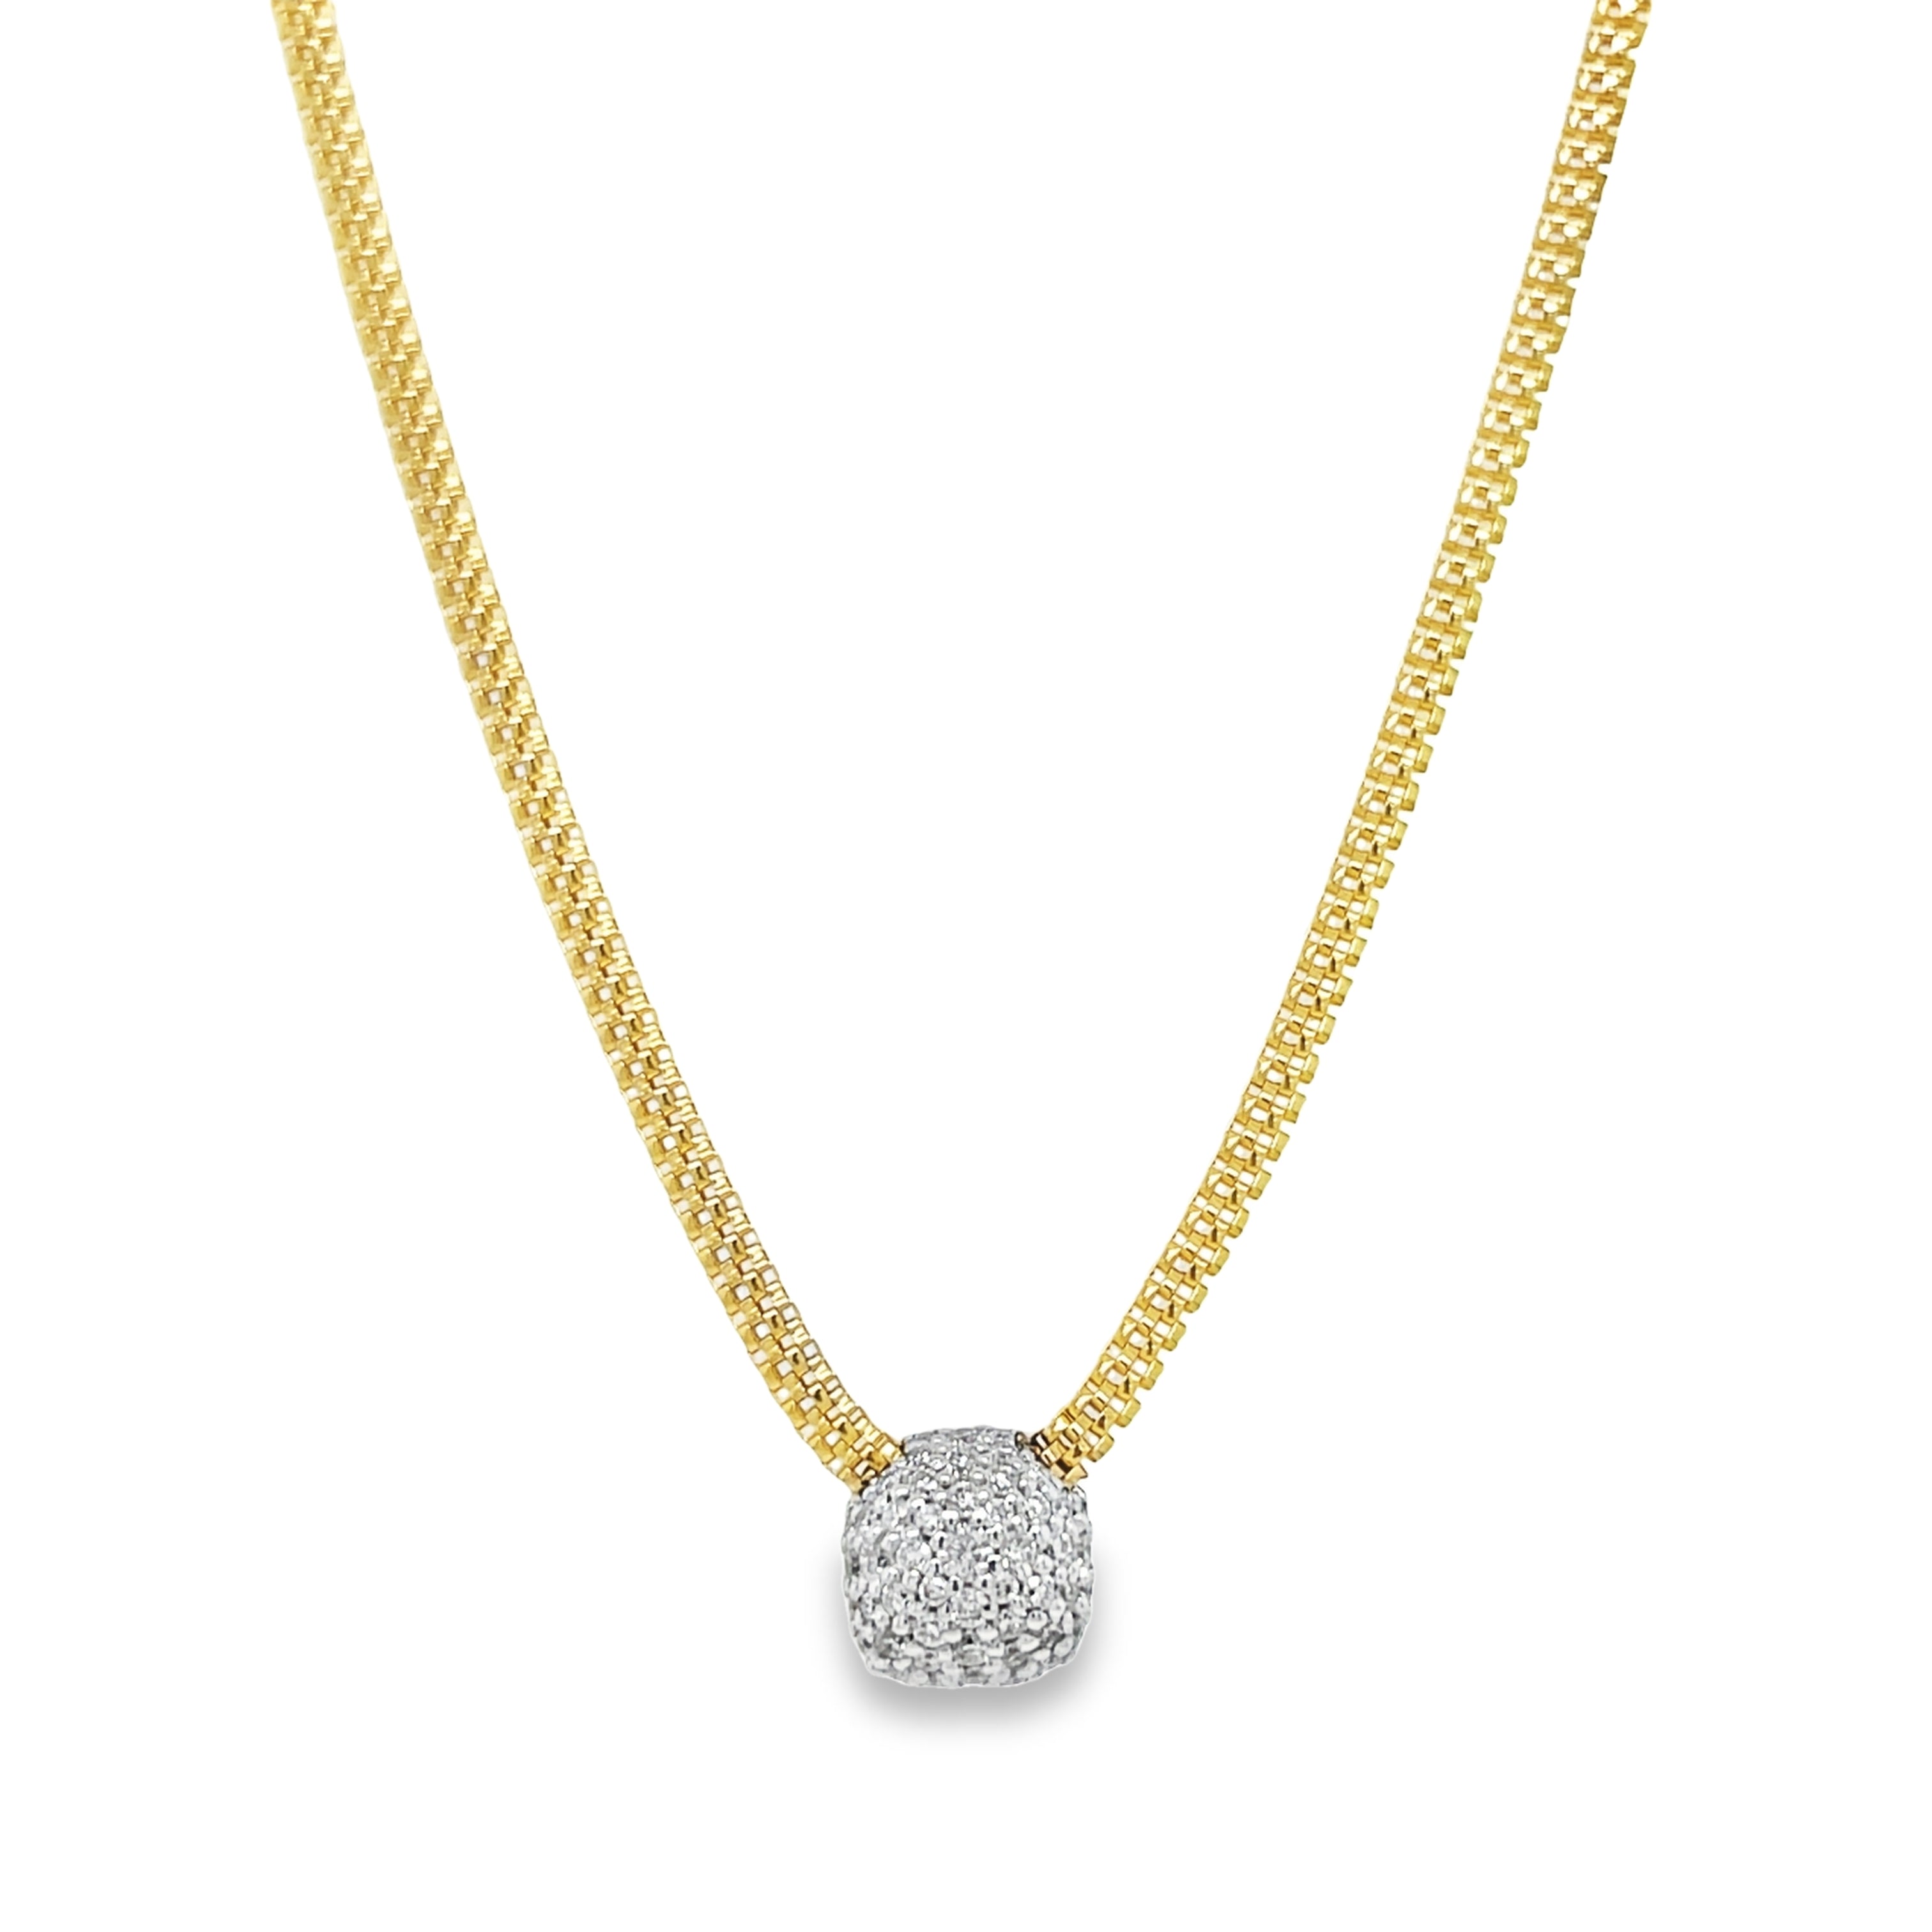 Experience luxury with our 18k Italian Yellow Gold Mesh Style Diamond Pave Solitaire Necklace. This exquisite piece features a sparkly diamond pave pendant on a trendy mesh chain. With a secure lobster clasp, it is 18" long for a perfect fit. Elevate any outfit with this stunning necklace!